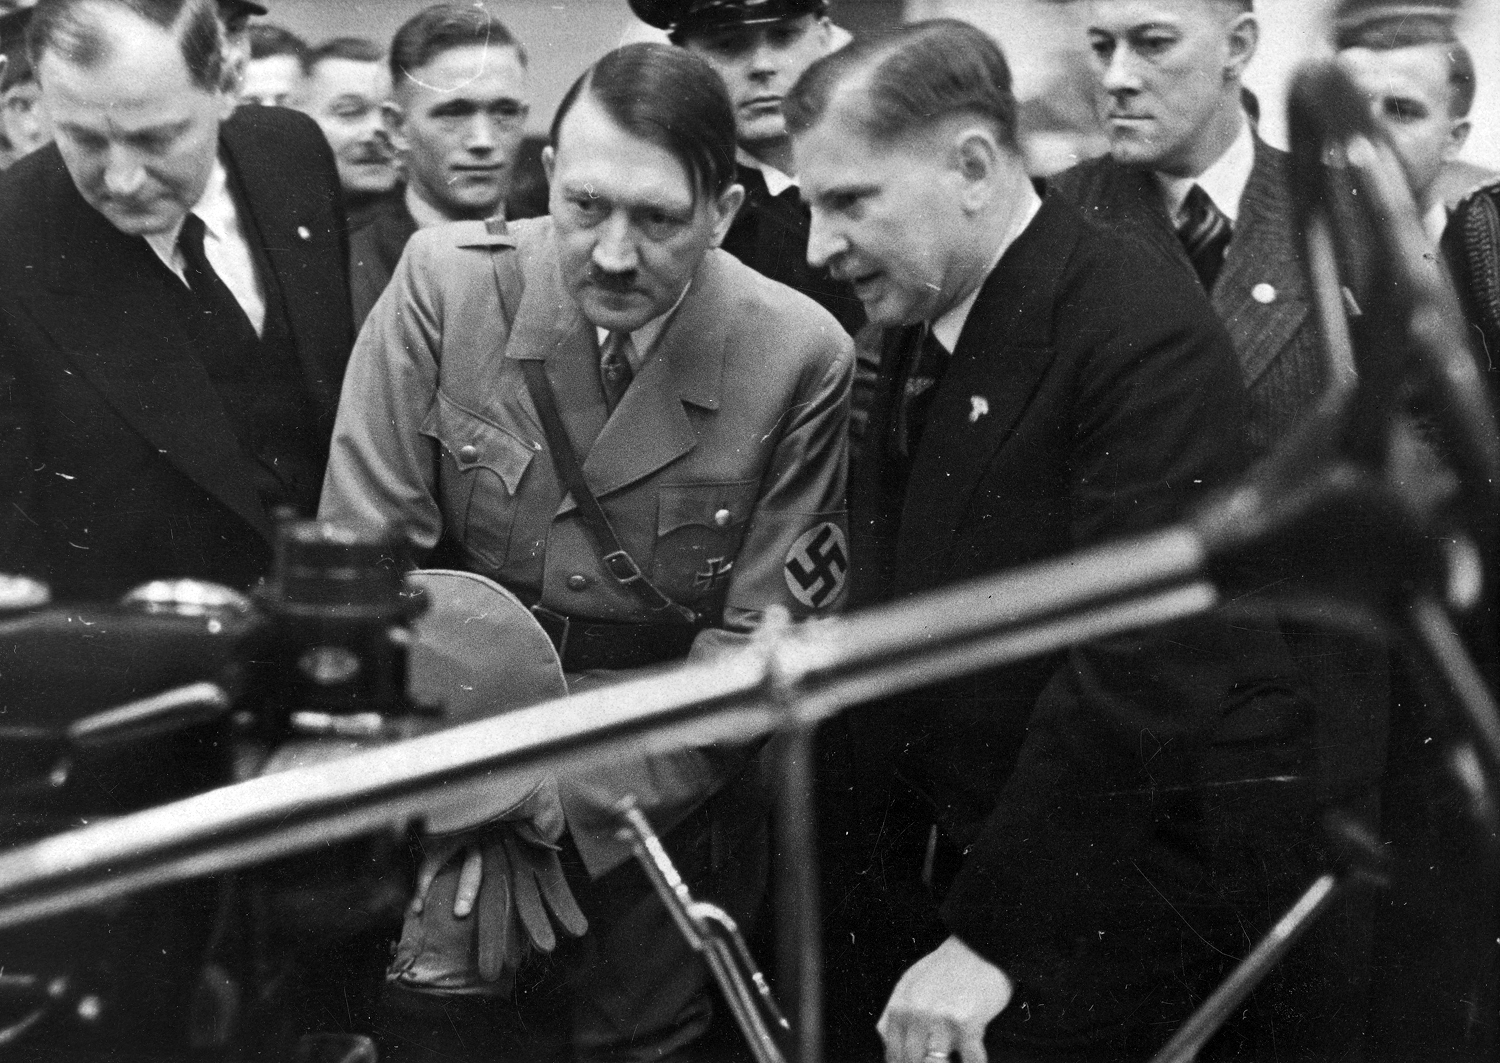 Adolf Hitler at the automobile show